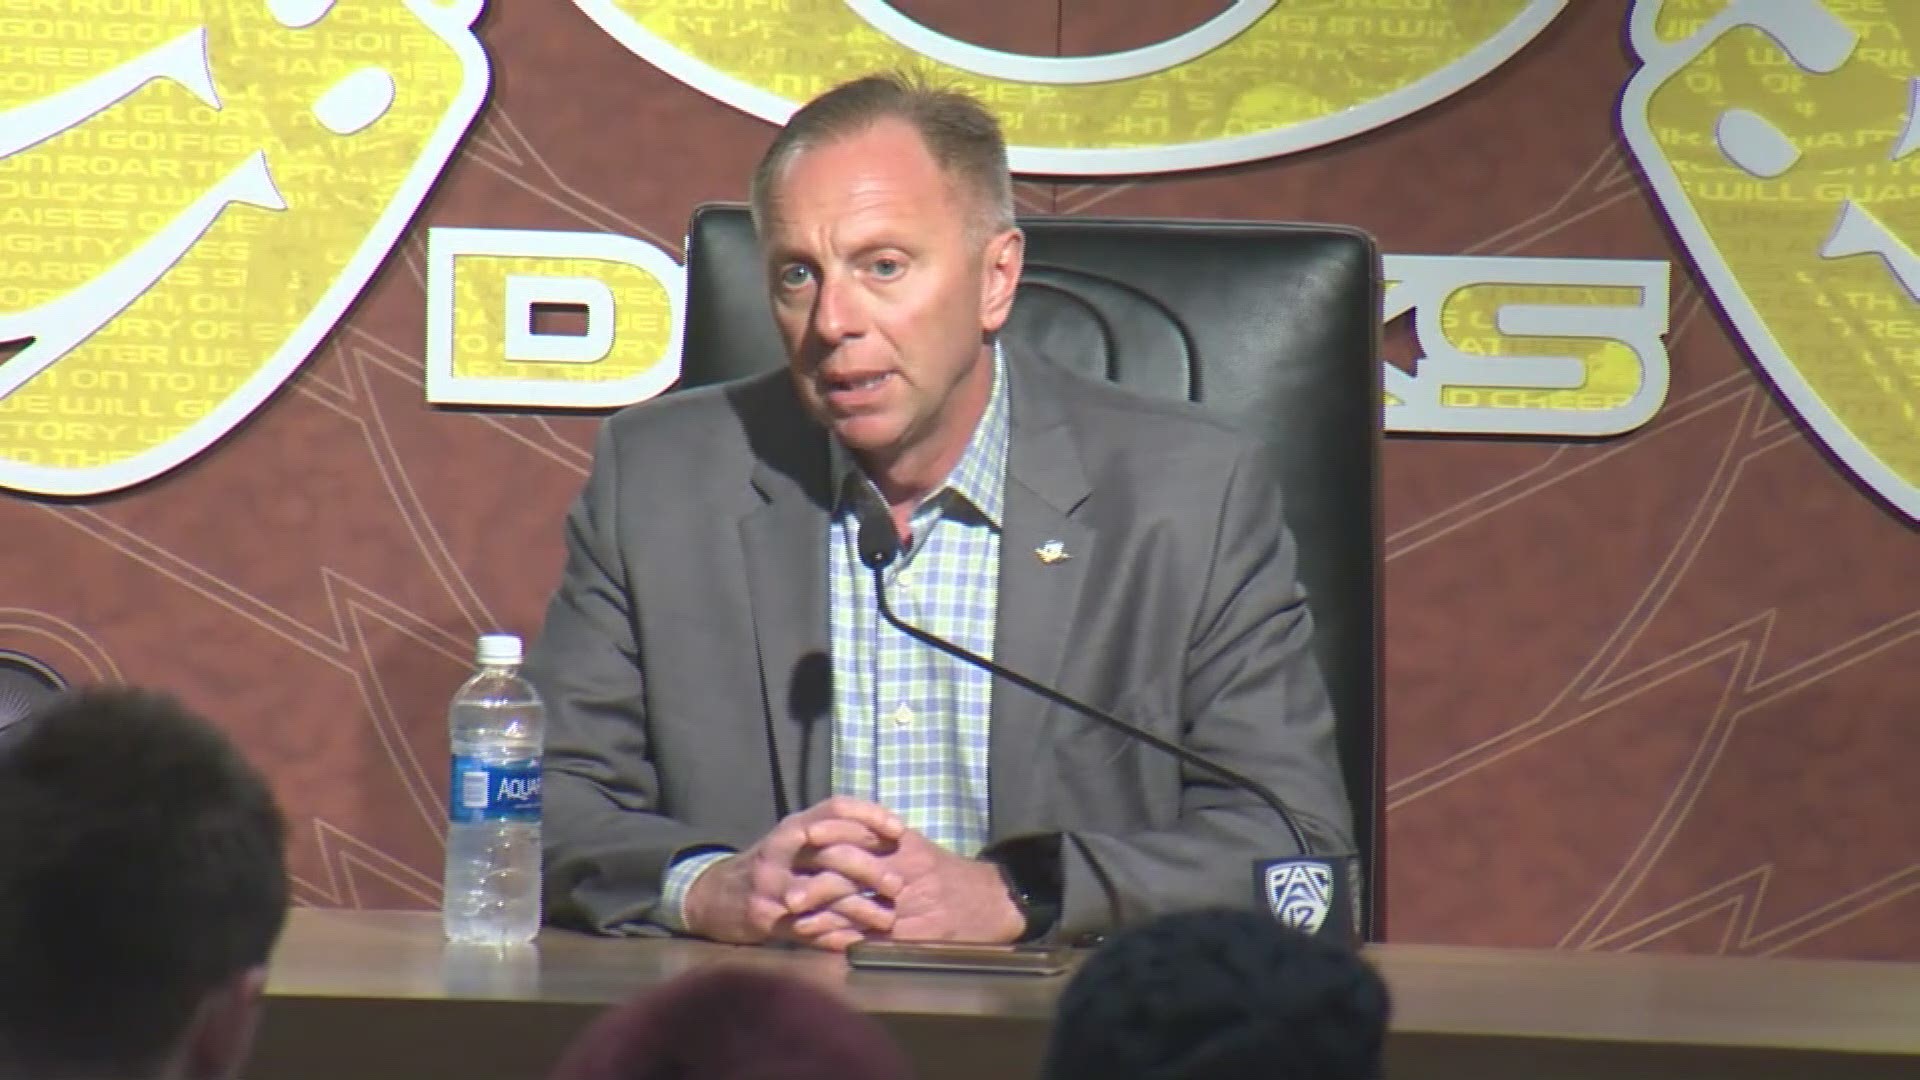 Oregon athletic director Rob Mullens' full press conference following the departure of head coach Willie Taggart on Dec. 5, 2017. Taggart accepted the job at Florida State.